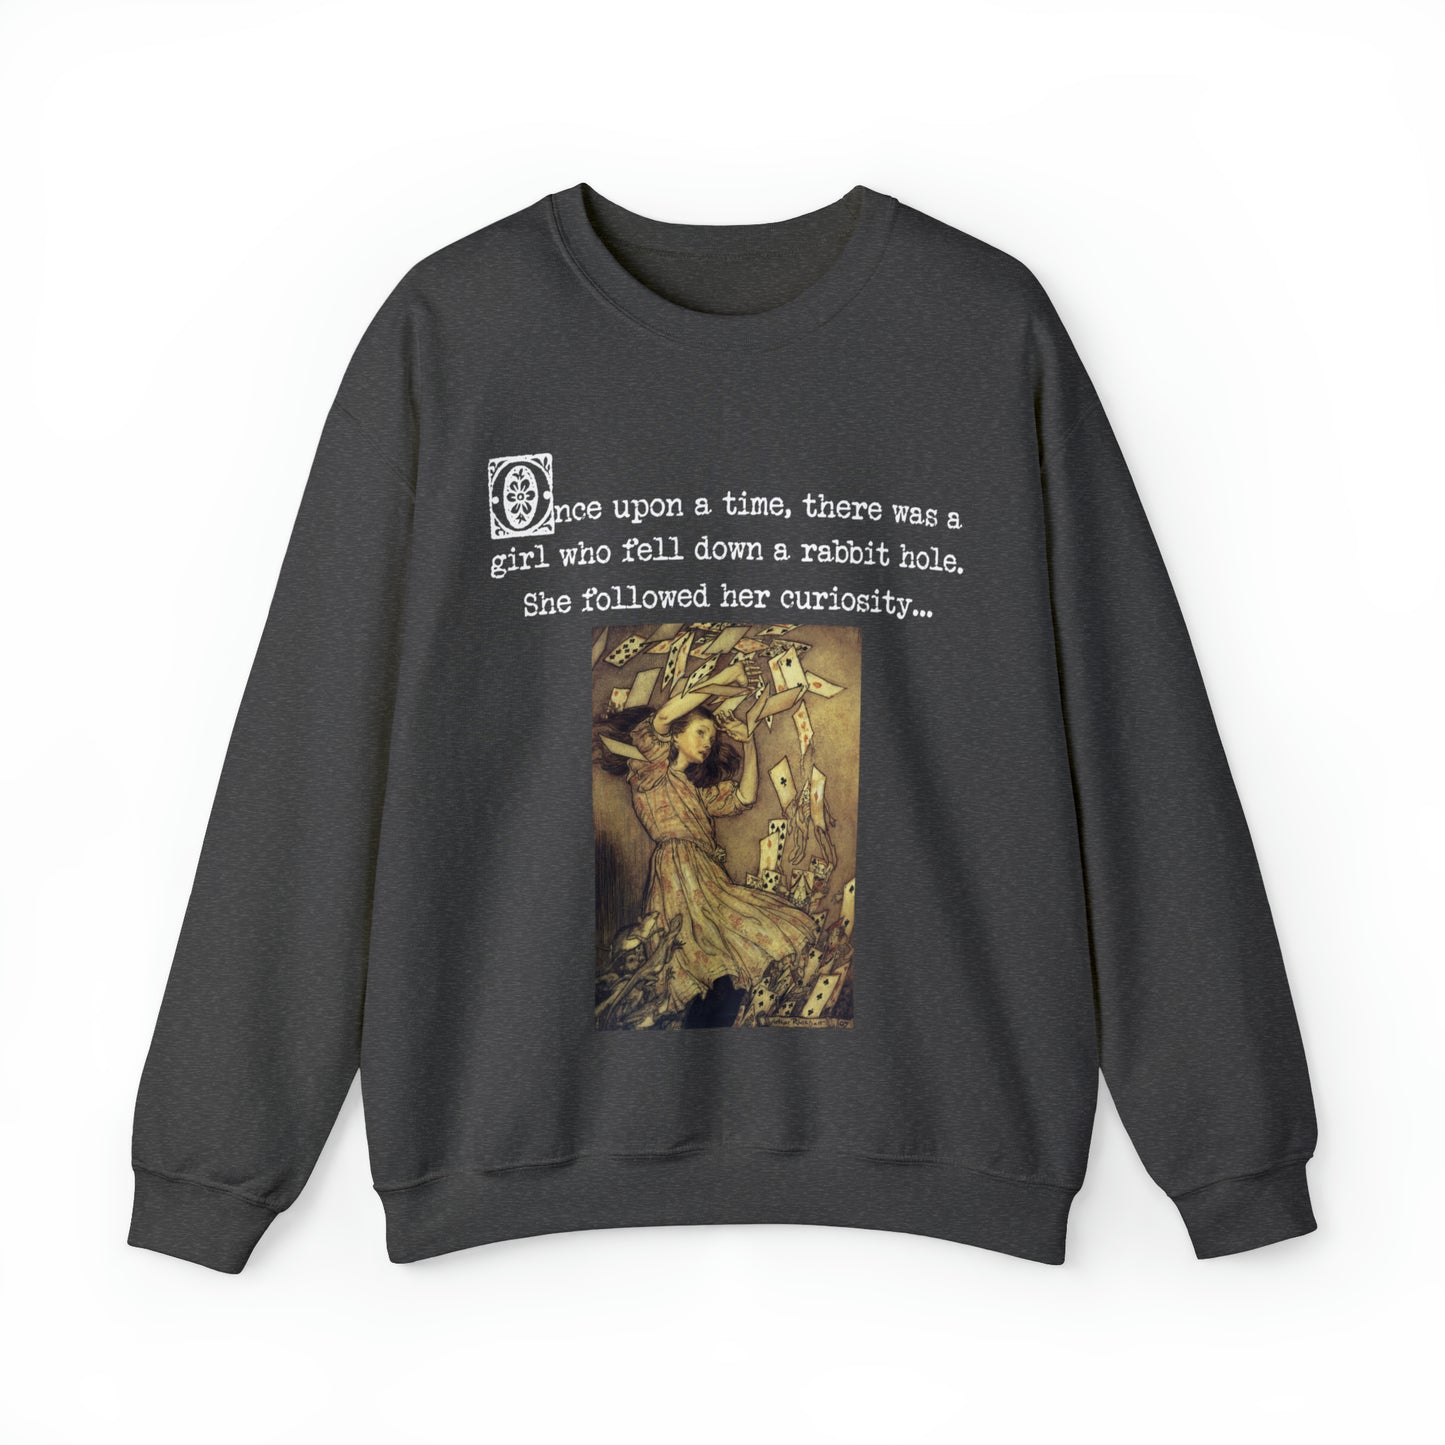 And Learned to Trust Her Instincts - Alice's Adventures in Wonderland Classic Fairytale Vintage Illustration Unisex Pullover Sweatshirt